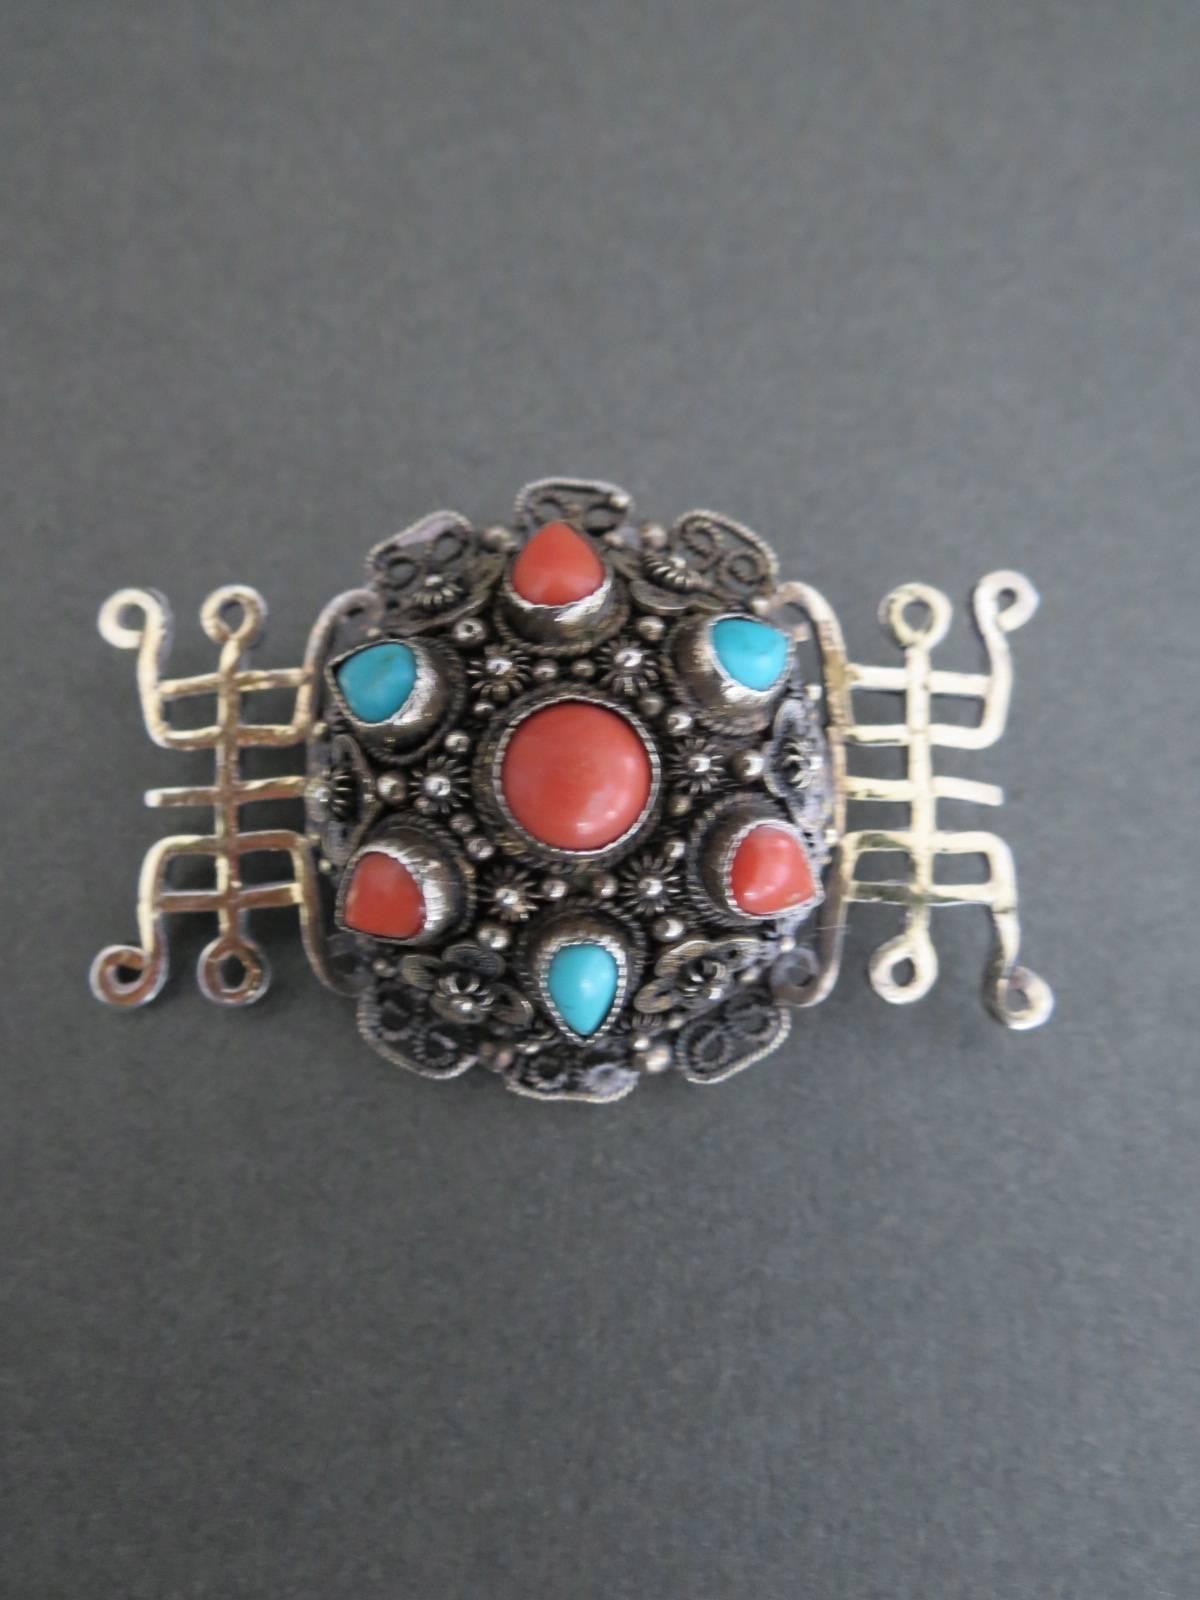 Amazing Vintage Sterling Silver Filigree Chinese Brooch with Salmon Coral and Turquoise Details .
Item Specifics
Height: 3.4cm (approx 1.50